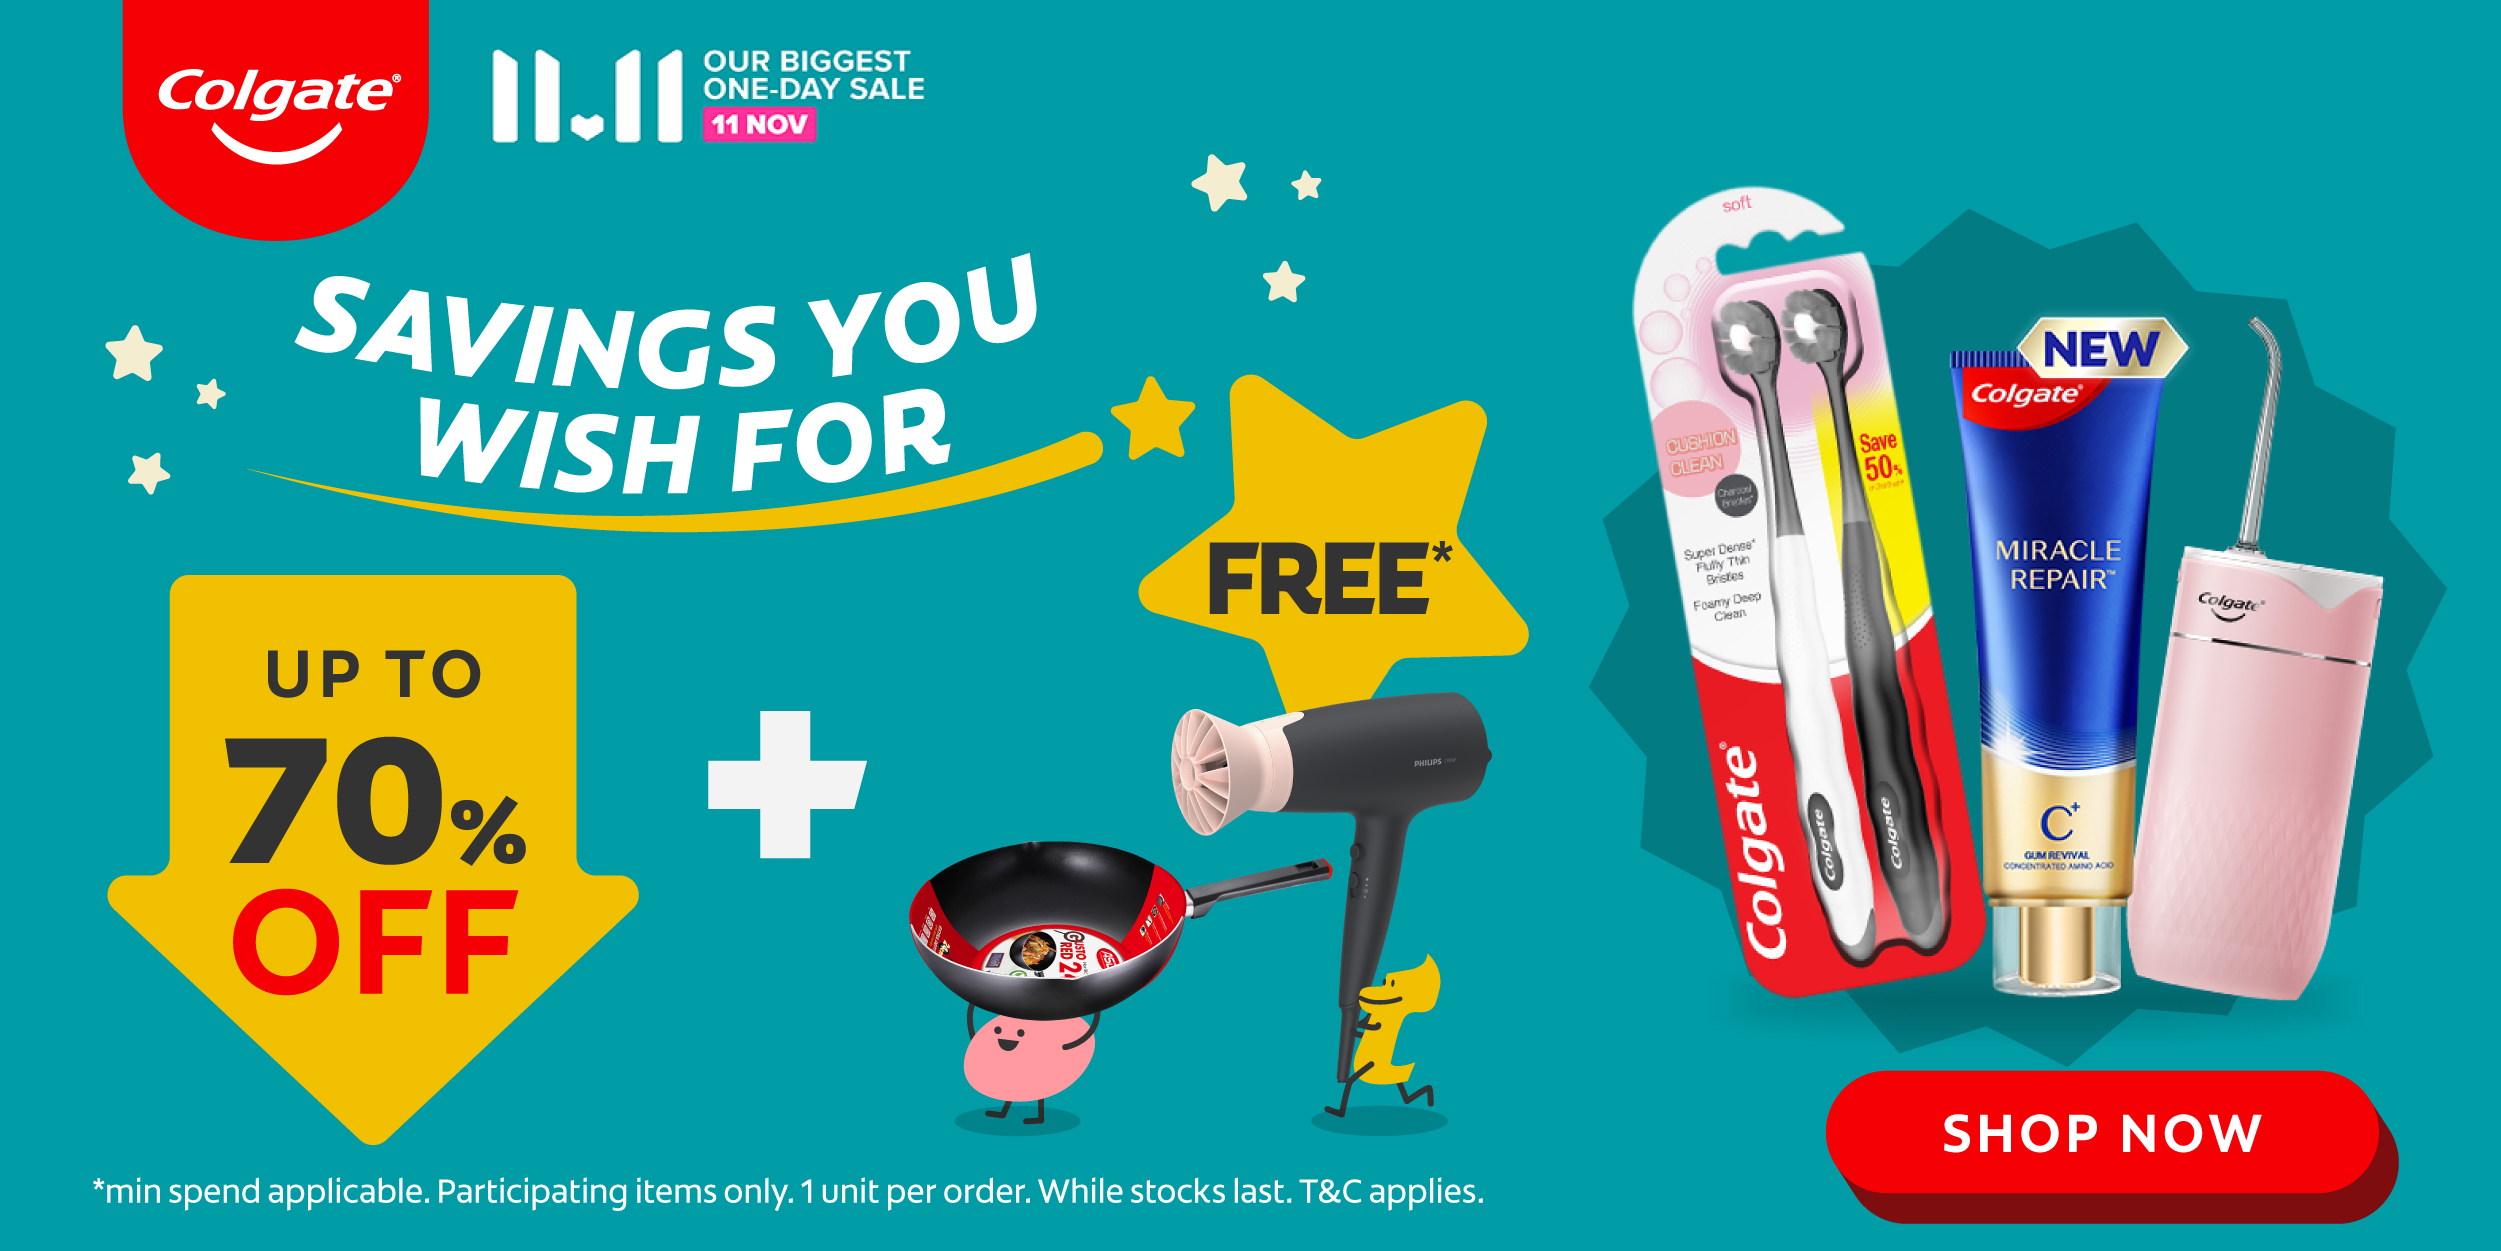 Wish upon Sm11es this 11.11! Deals up to 70% + extra $16* off voucher + FREE Gifts on 11 Nov!